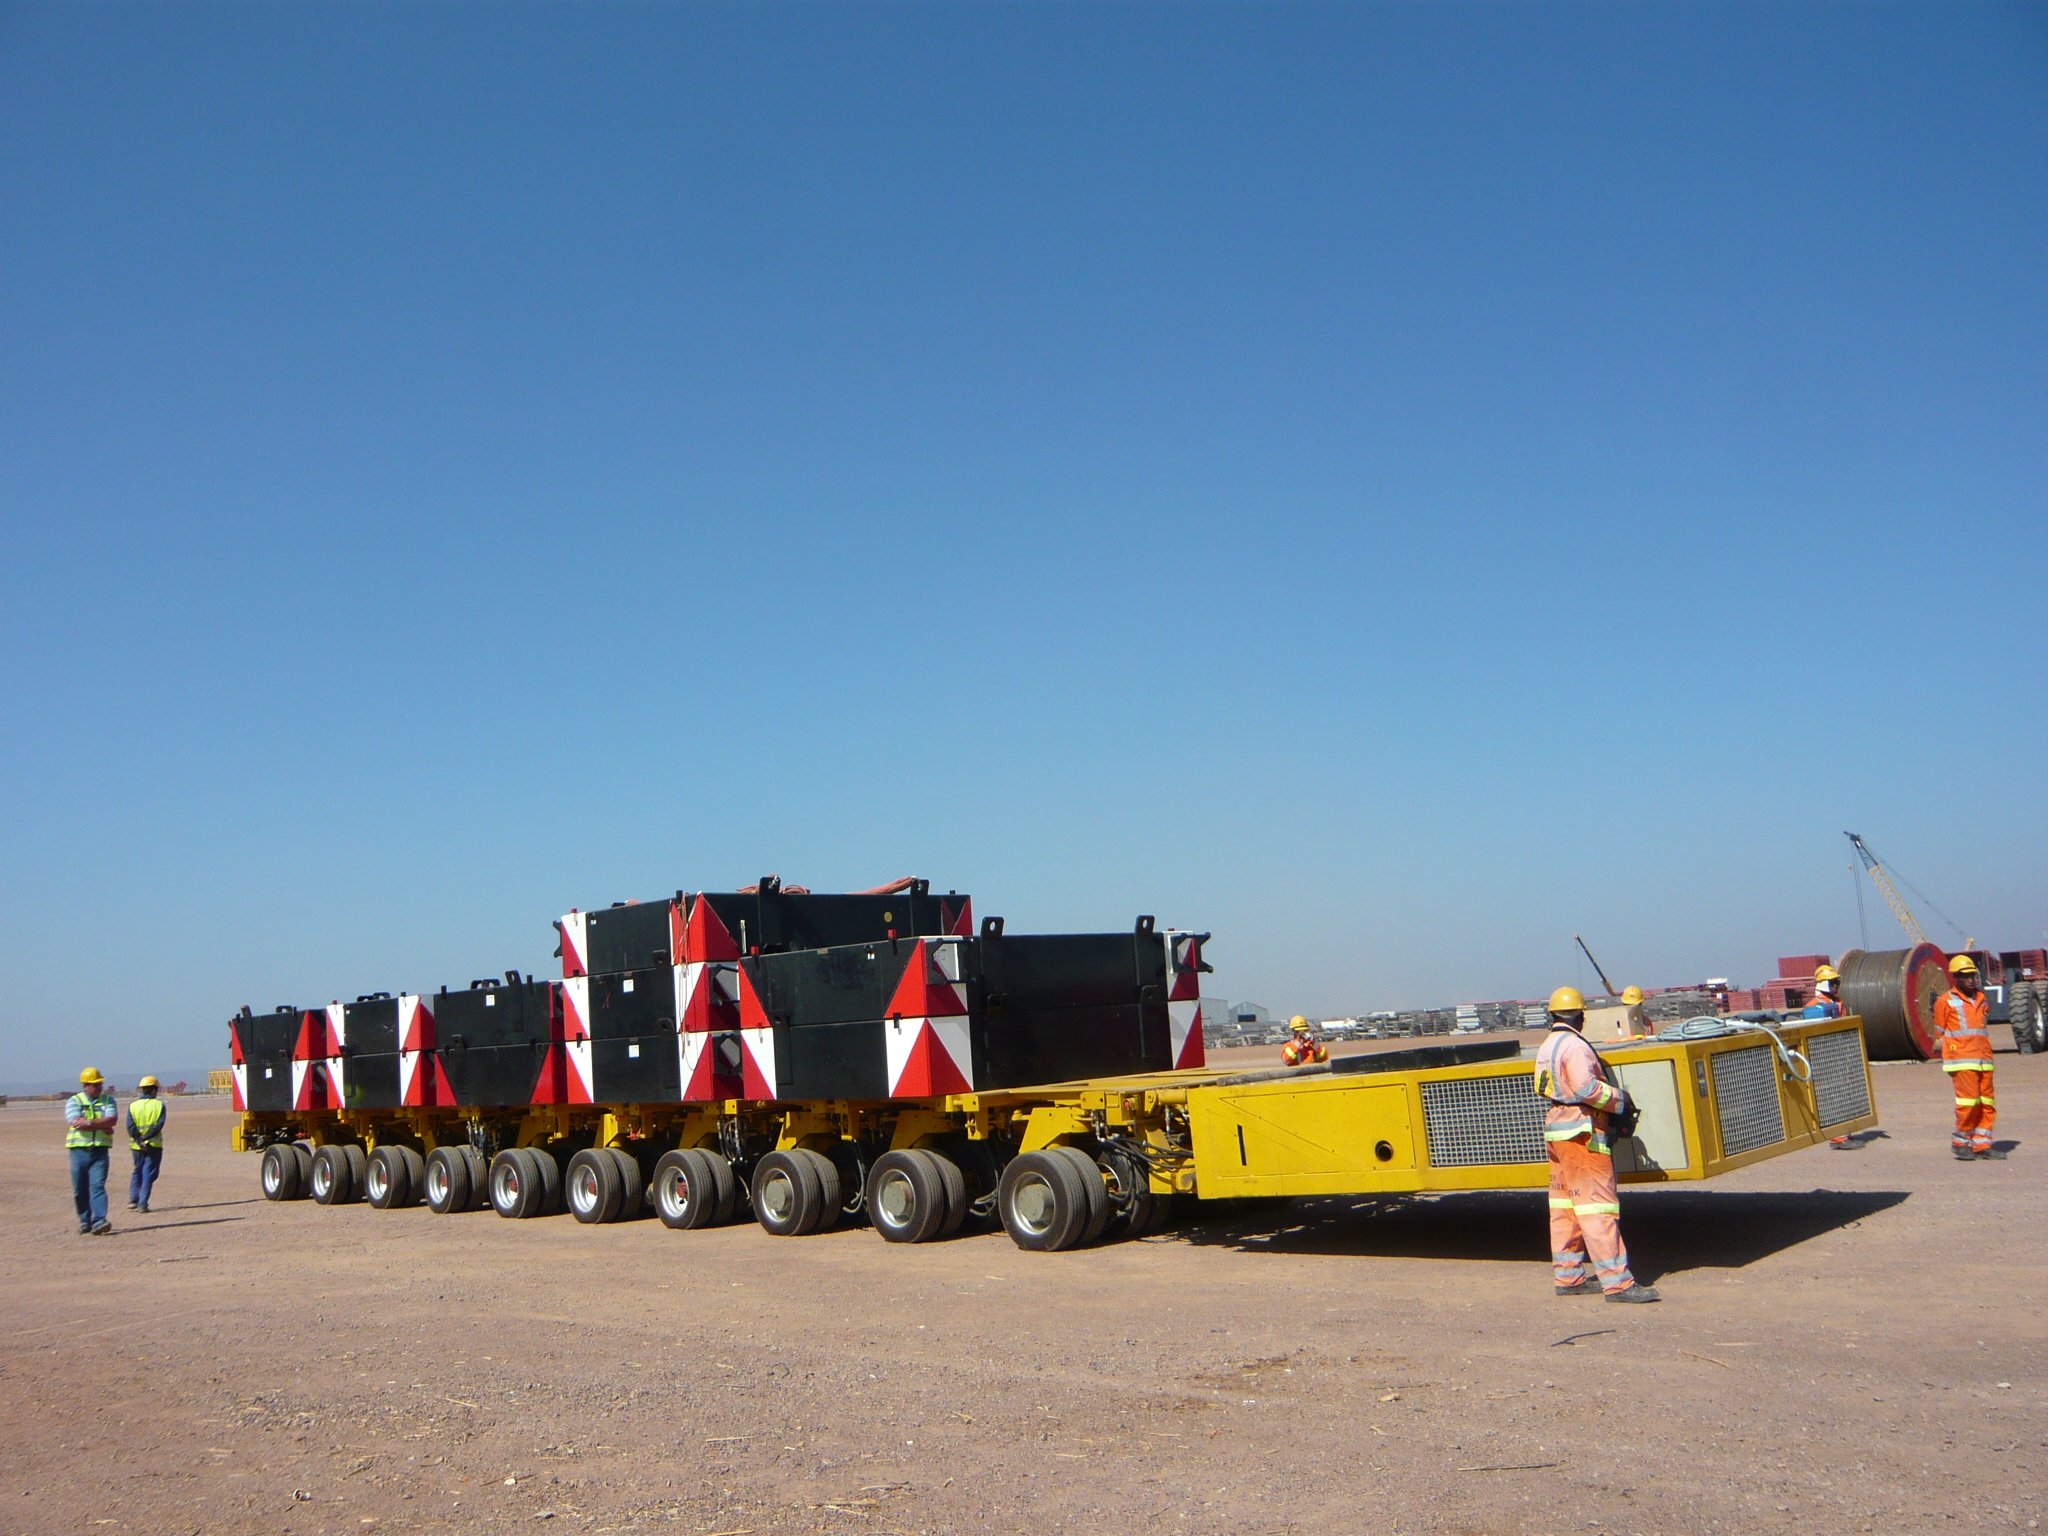 The-self-propelled-modular-transporters-work-on-crawler-crane-counter-weight-movement